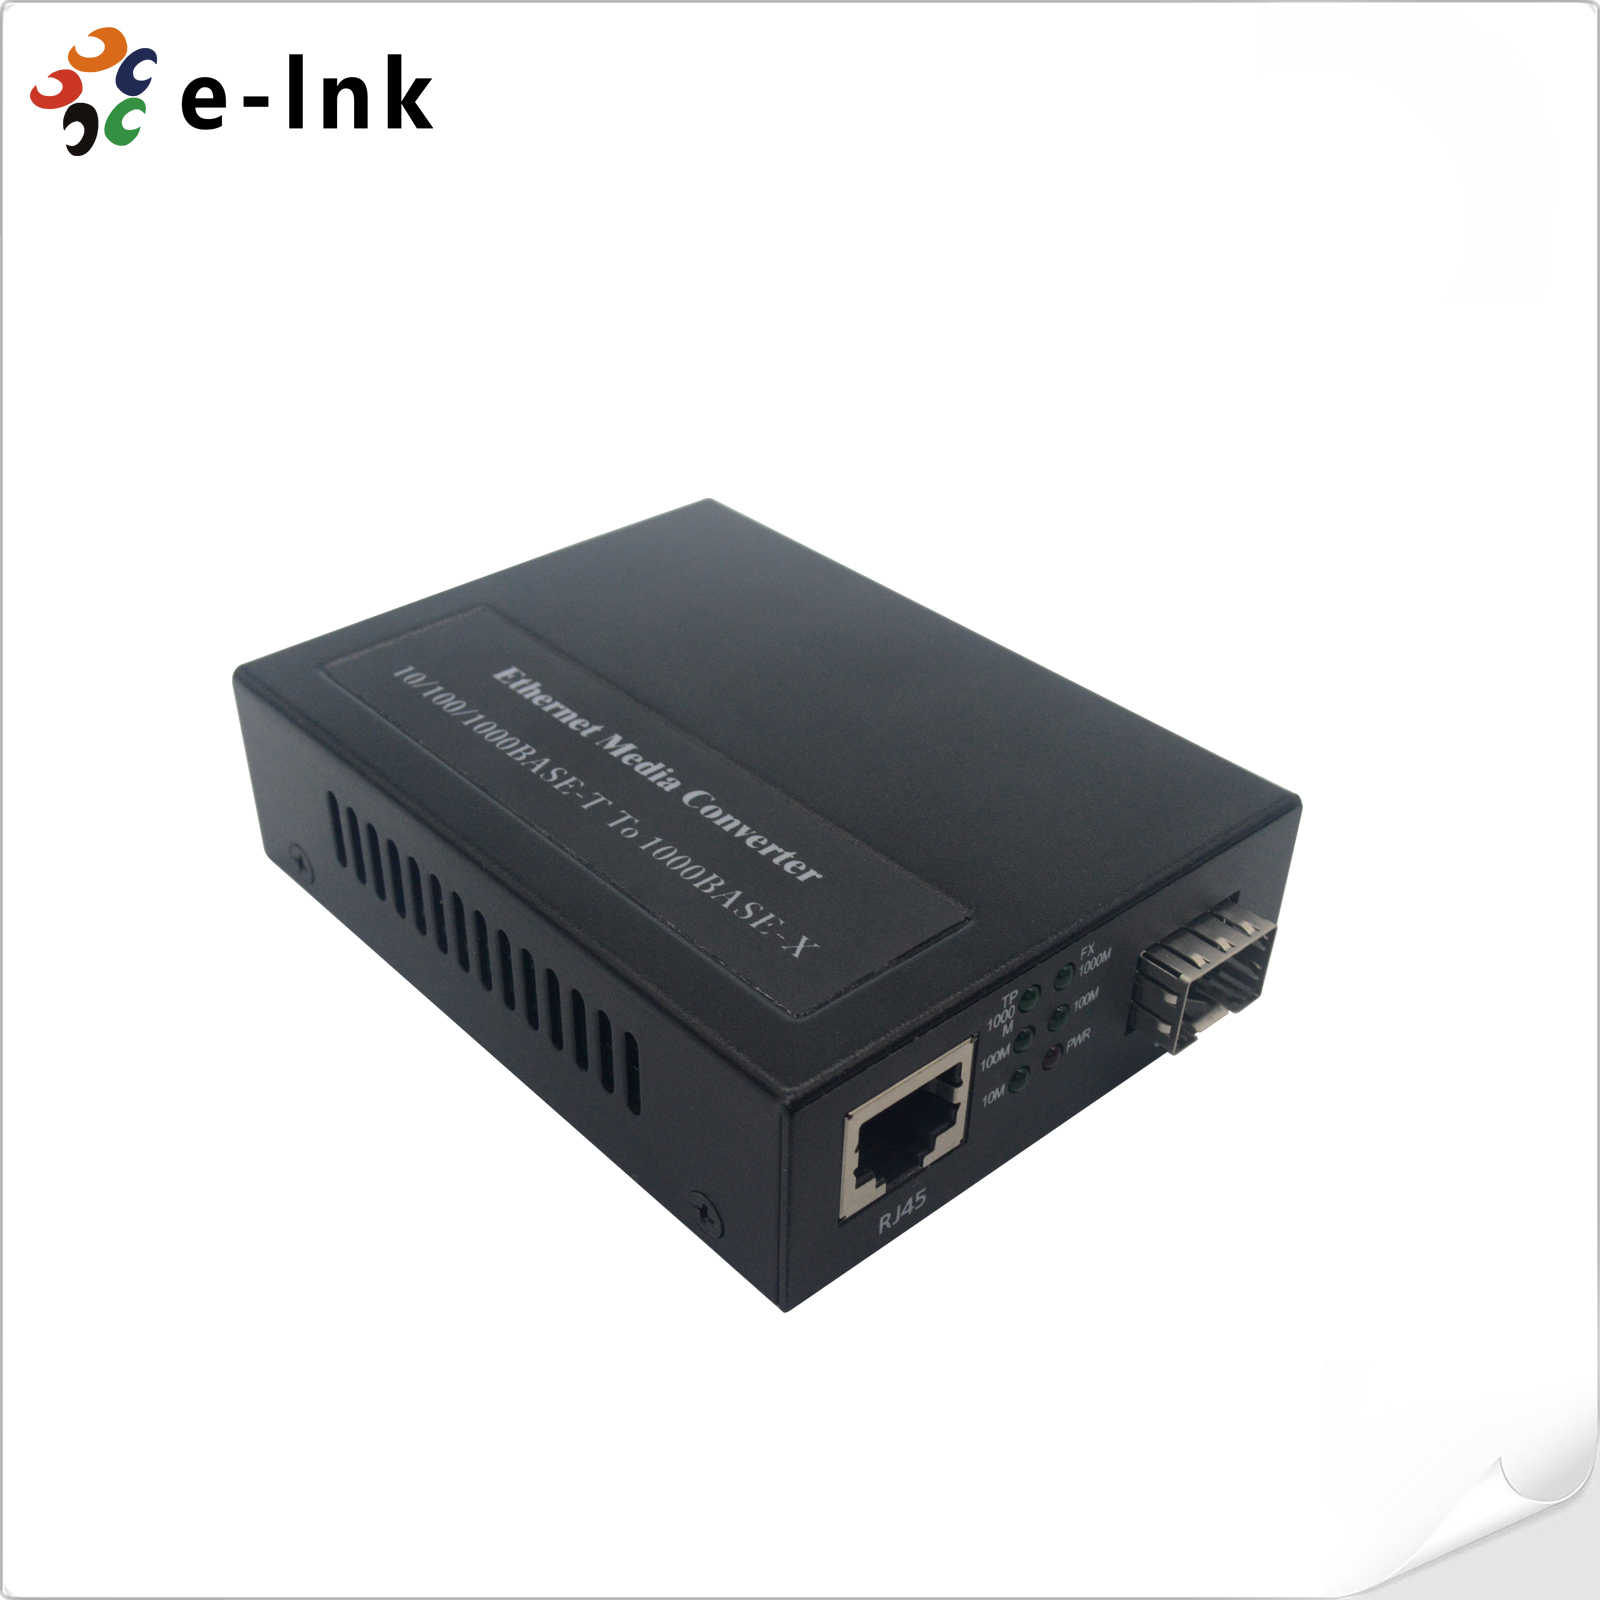 10/100/1000BASE-T to 100/1000BASE-X SFP Media Converter with Built-in Power Supply